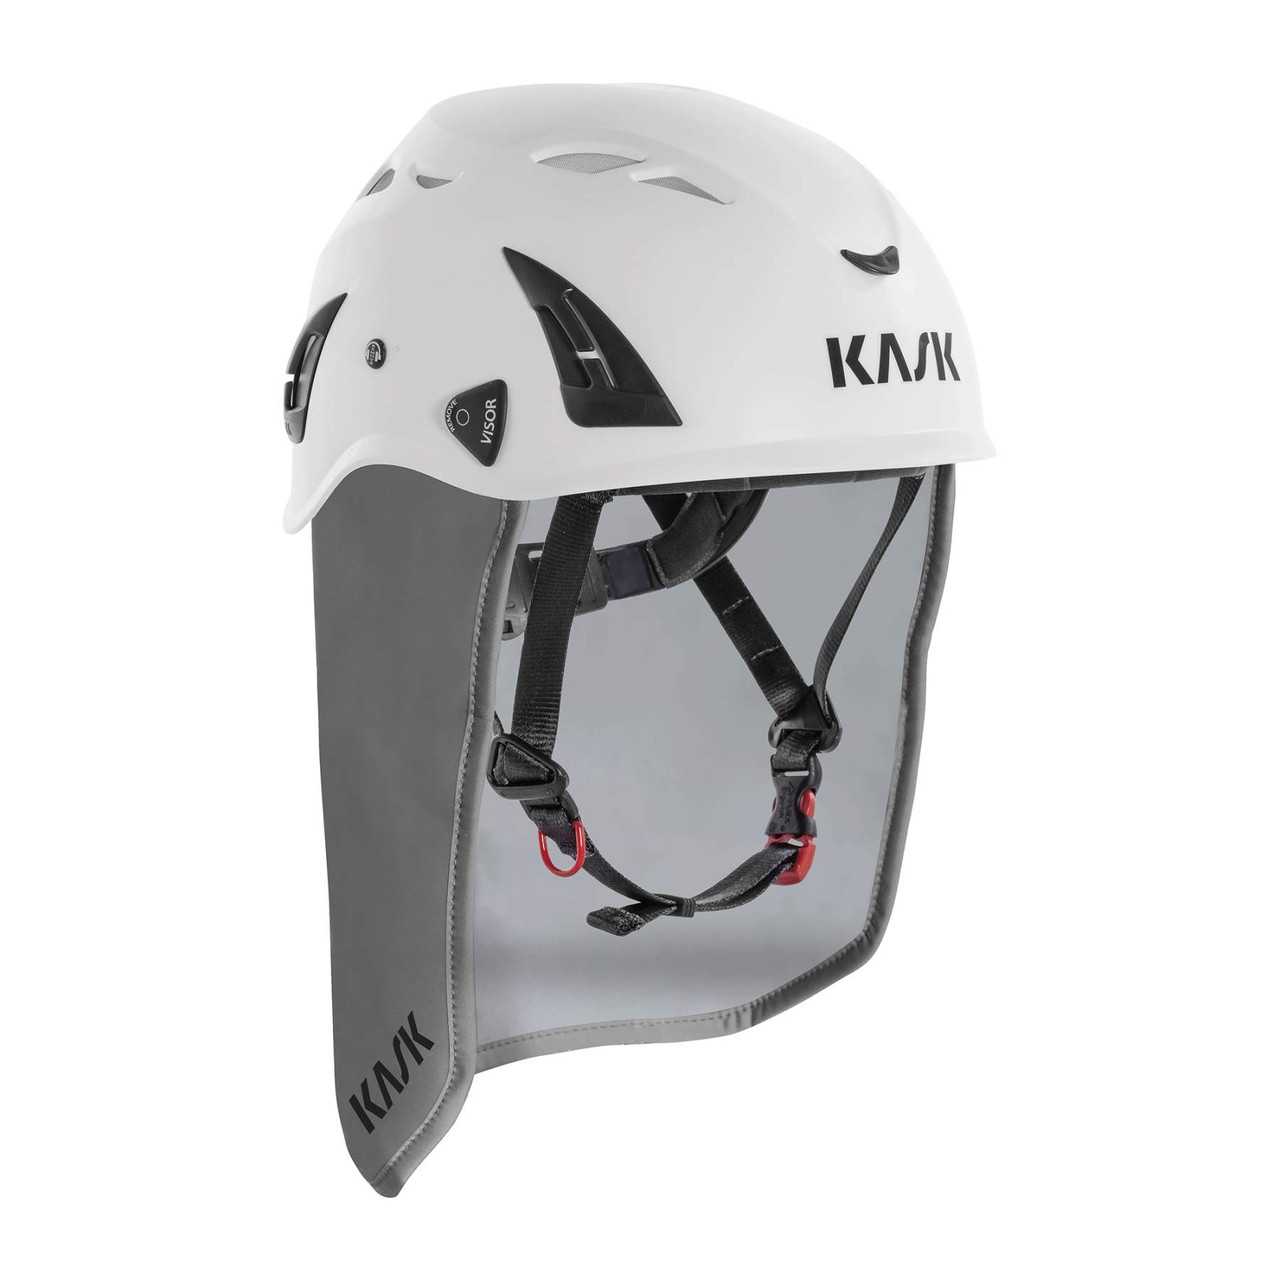 KASK & Wind Neck Plasma - Industrial Safety Products